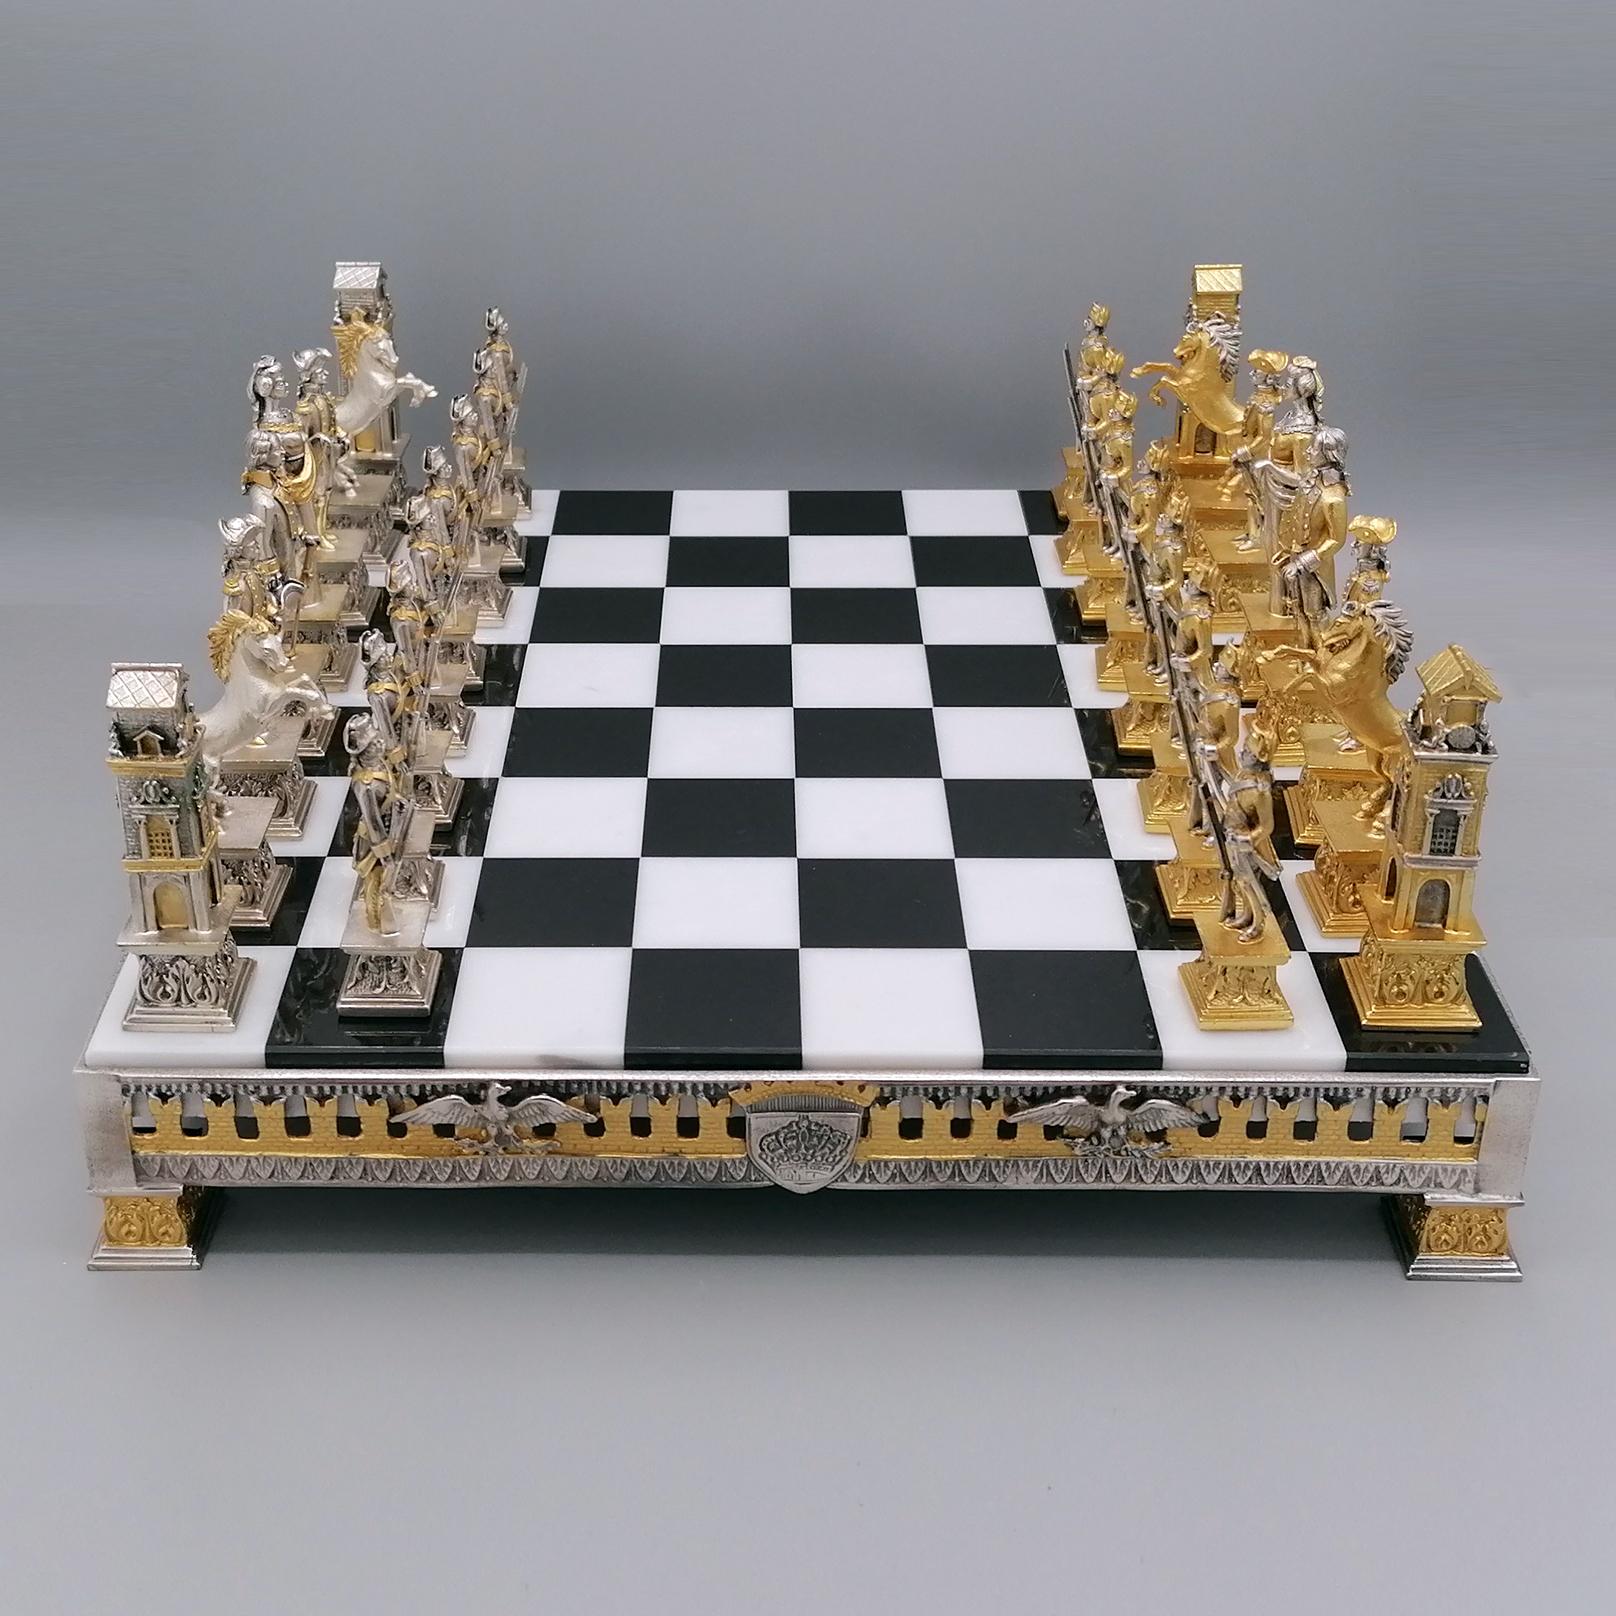 $9.8 million most expensive chess set